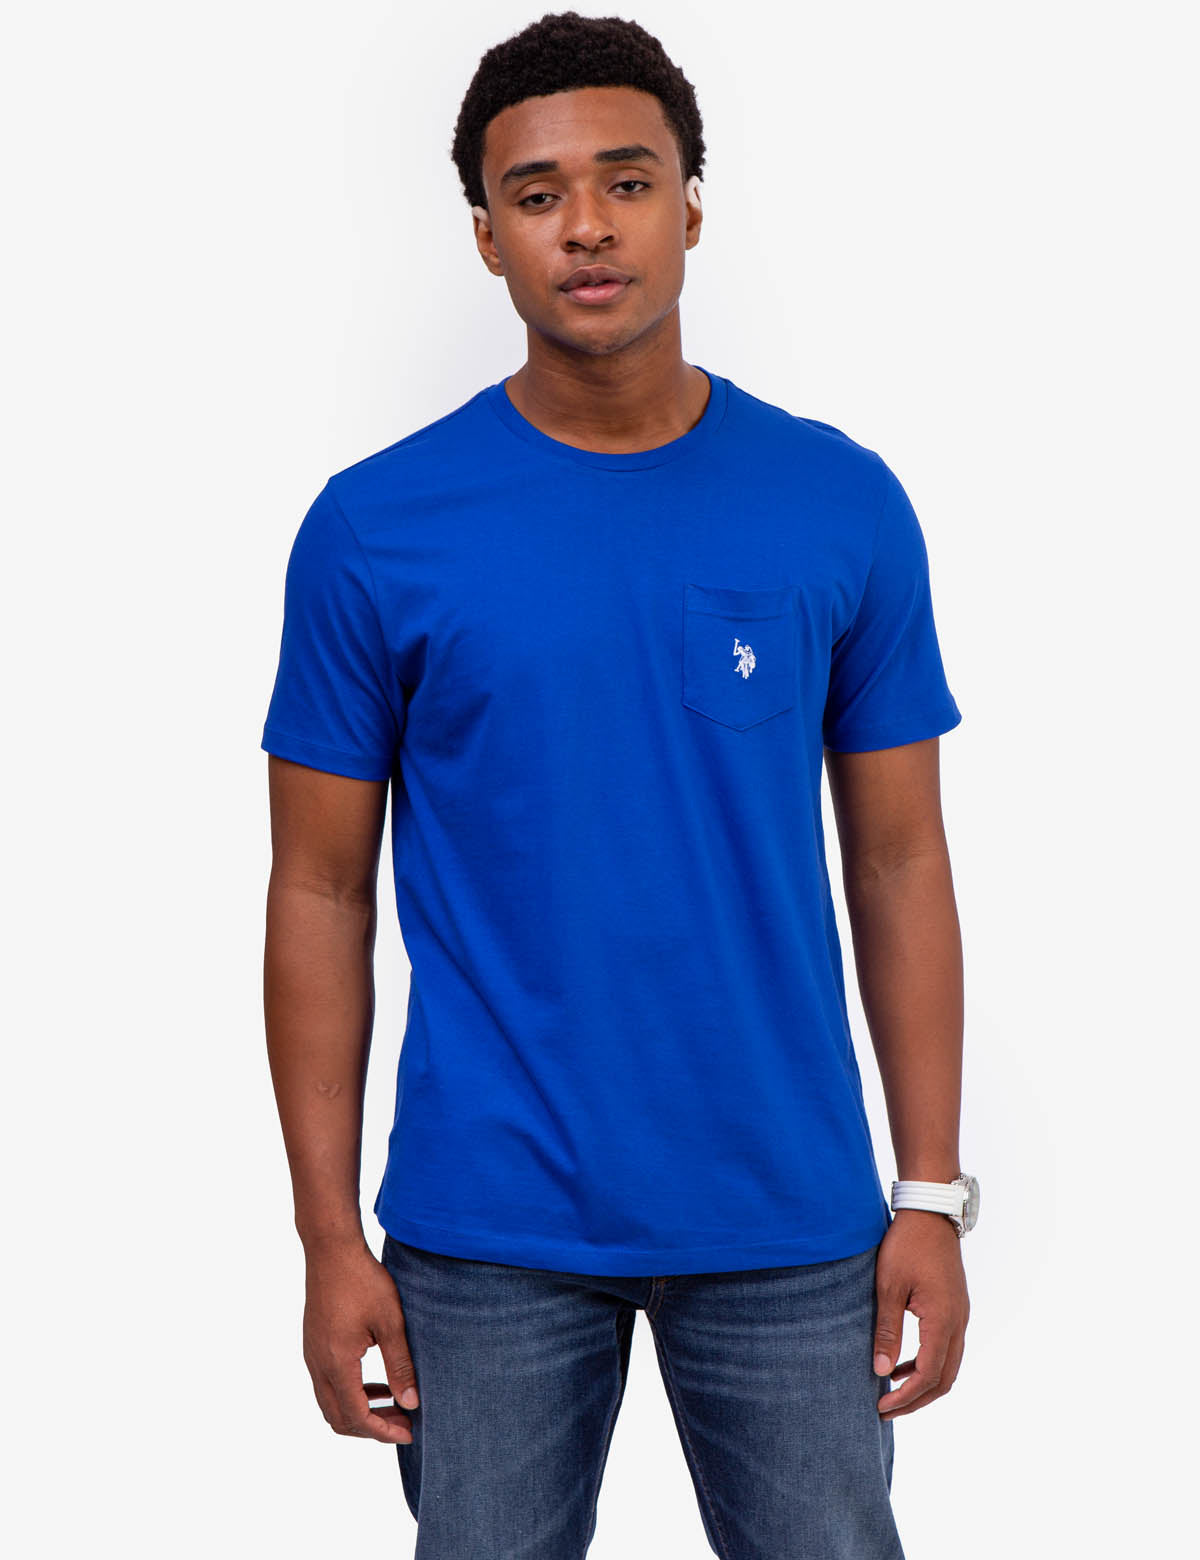 t shirt under polo